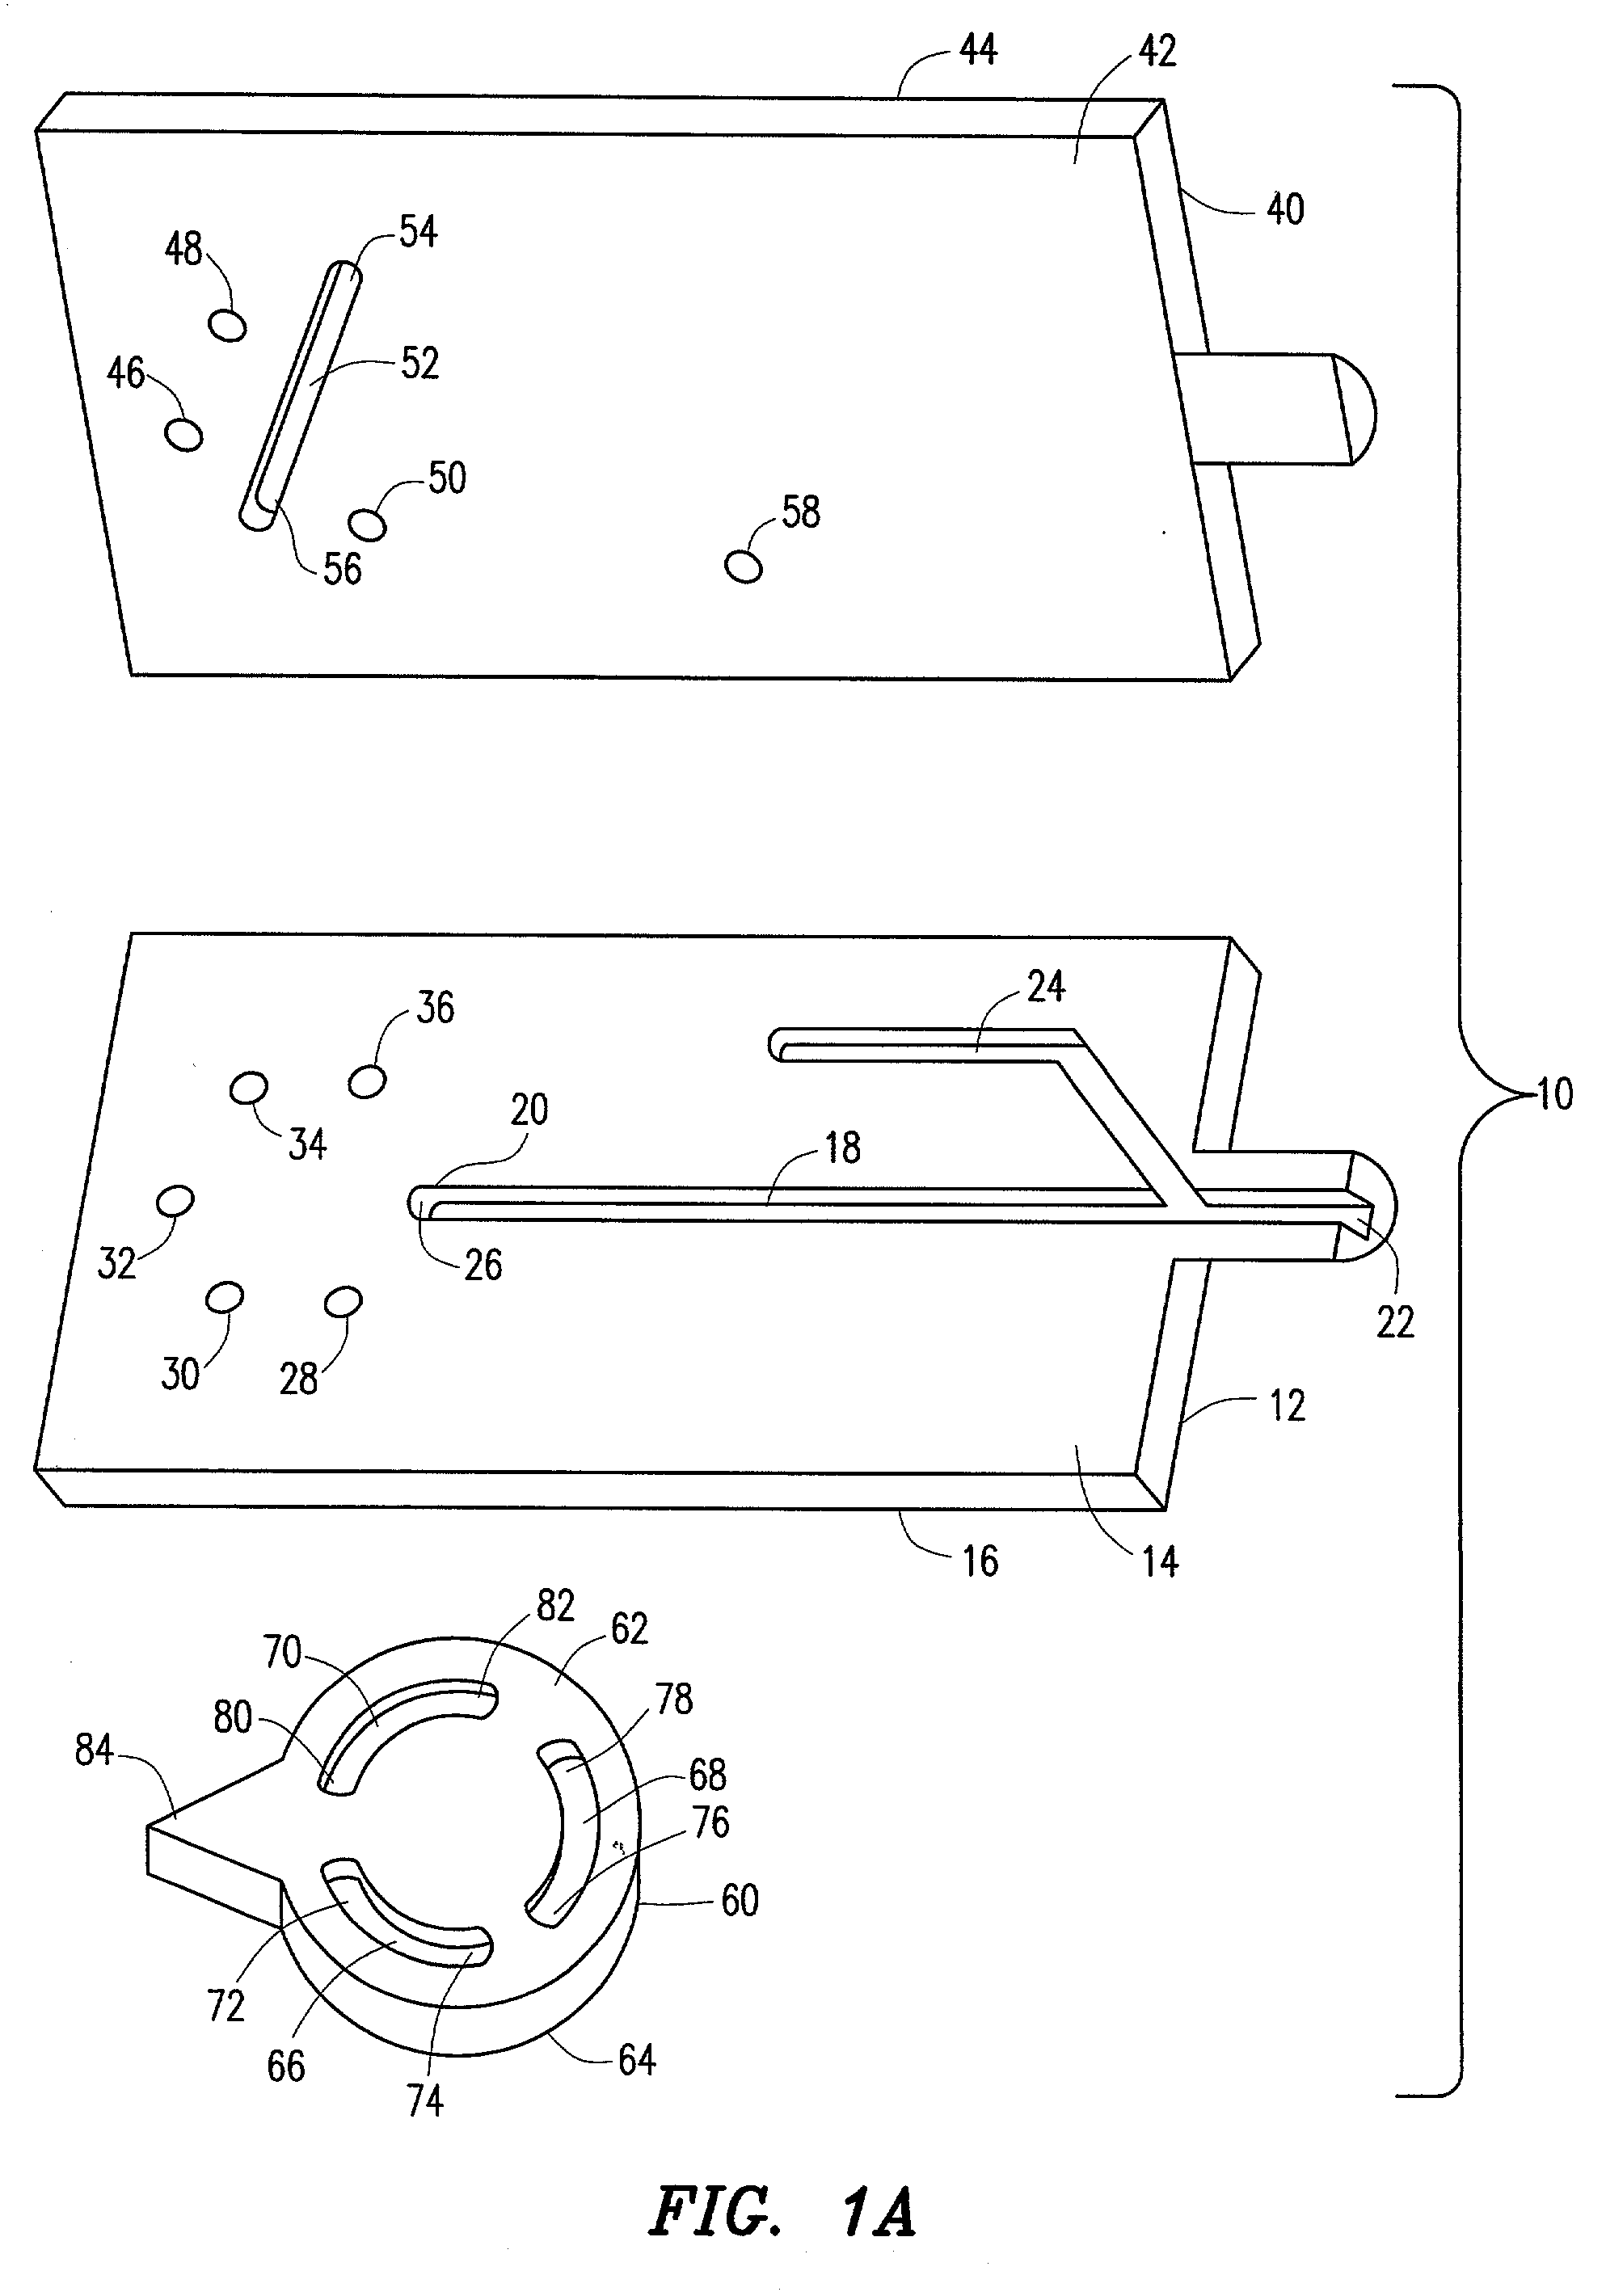 Paek embossing and adhesion for microfluidic devices